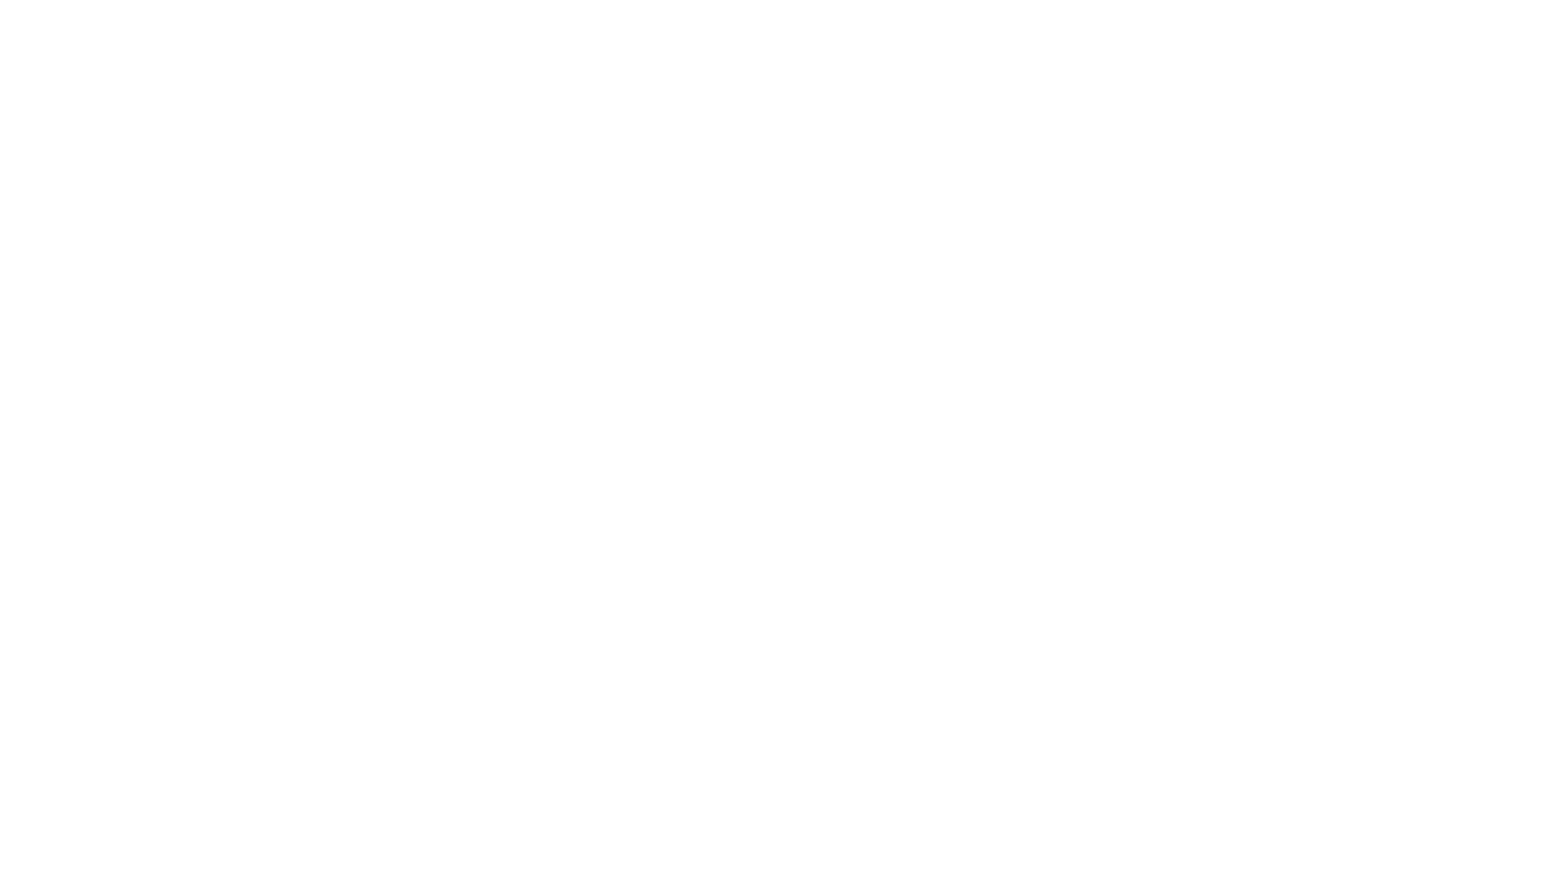 IHS Towers logo large for dark backgrounds (transparent PNG)